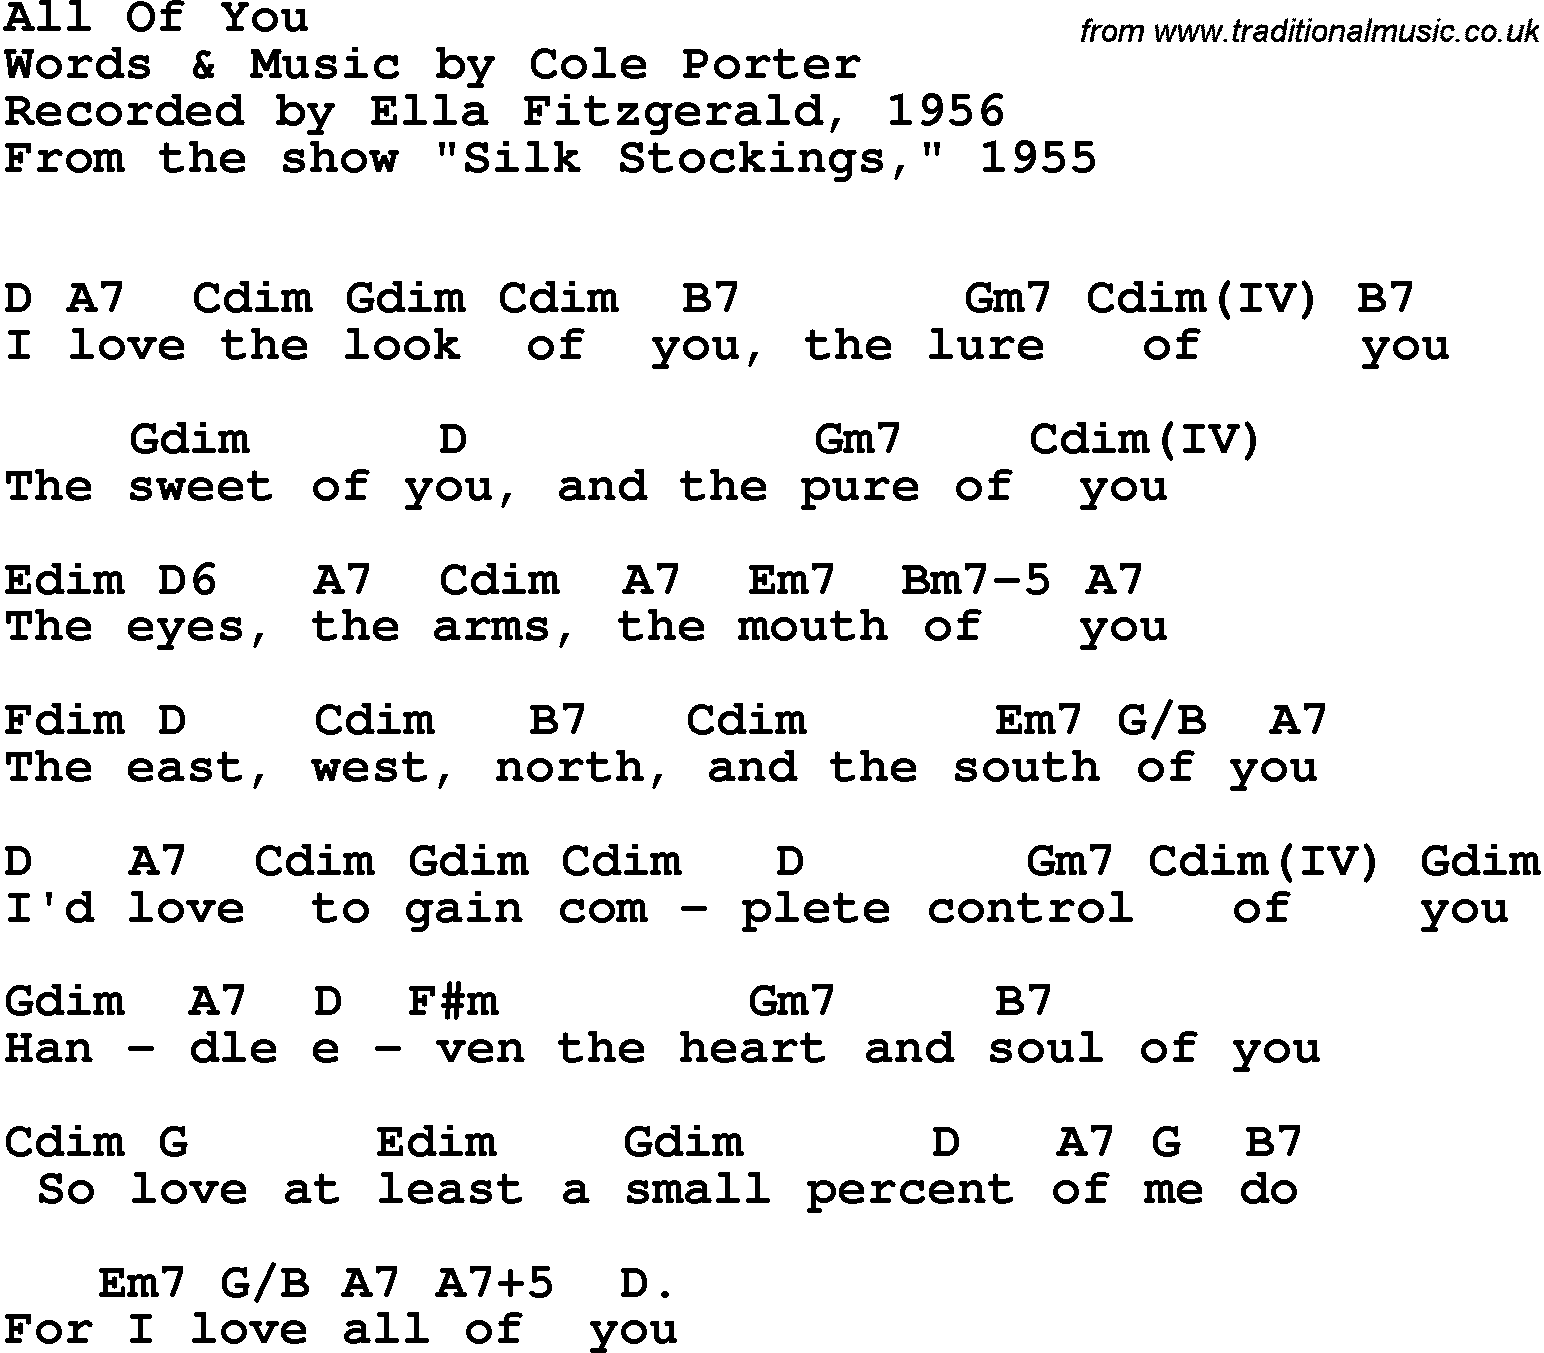 Song Lyrics with guitar chords for All Of You - Ella Fitzgerald, 1956